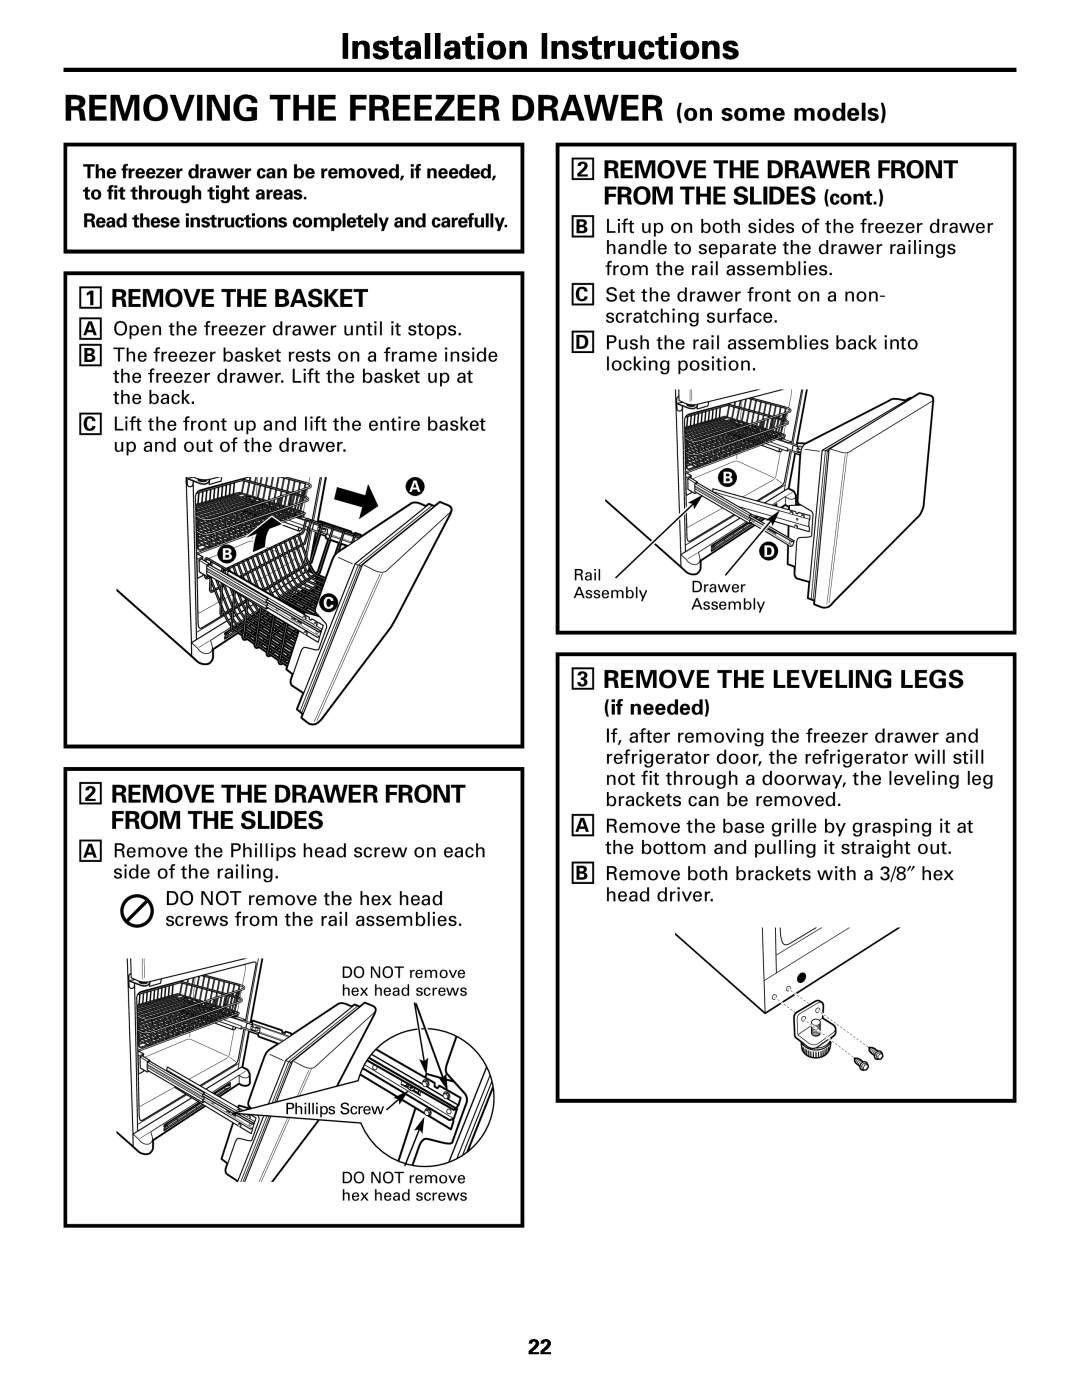 GE 197D4618P003 Installation Instructions REMOVING THE FREEZER DRAWER on some models, Remove The Basket, if needed 